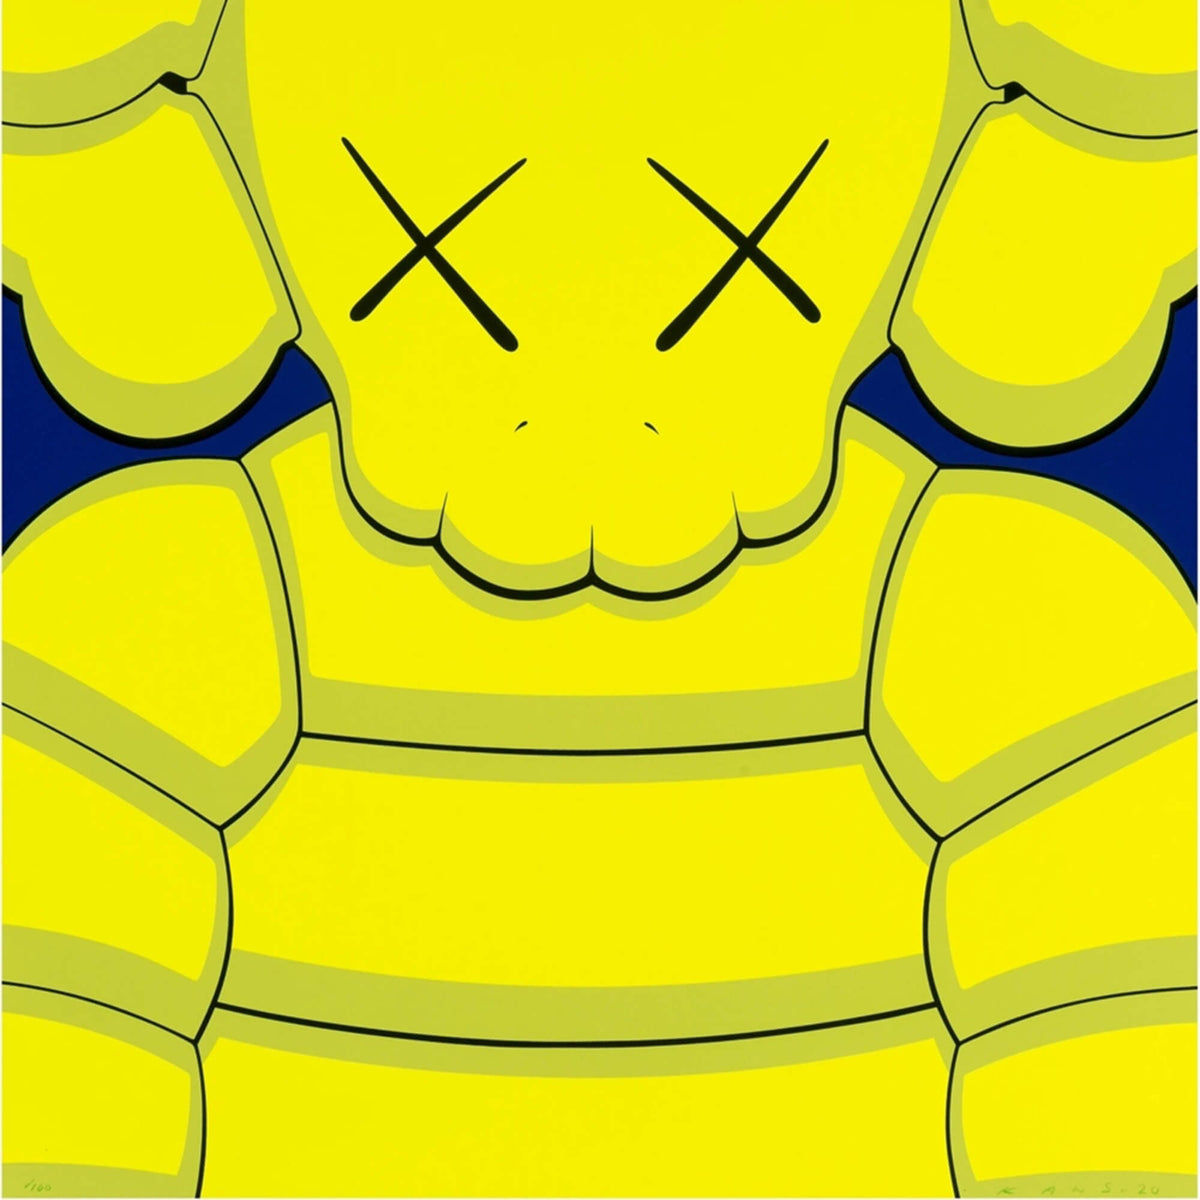 KAWS's What Party (Yellow On Blue) Print - Hype Museum